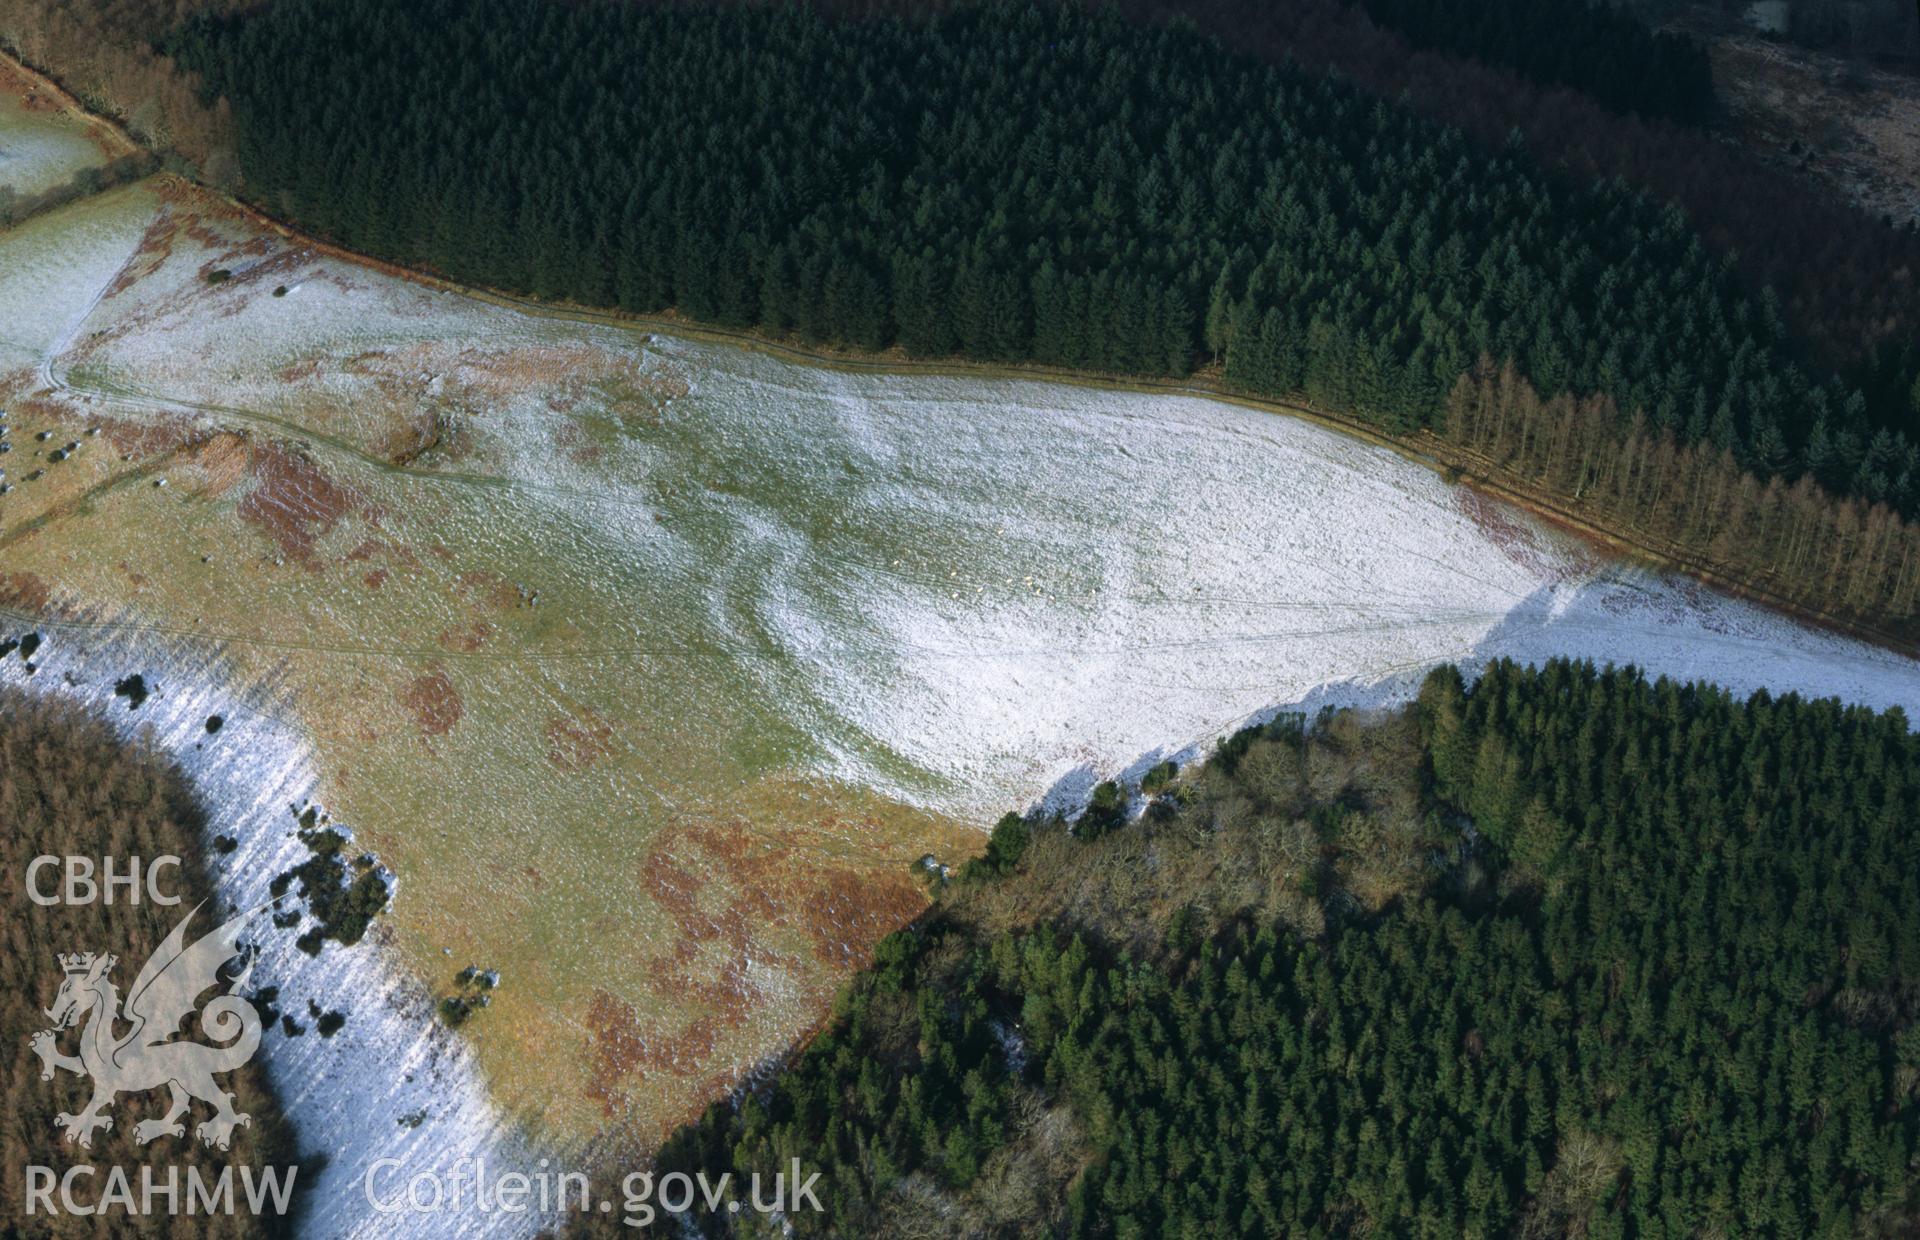 RCAHMW colour slide aerial photograph of Allt Aber Mangoed, defended enclosure, under drifting snow revealing earthworks outside enclosure (stereo colour). Taken by Toby Driver on 31/01/2003